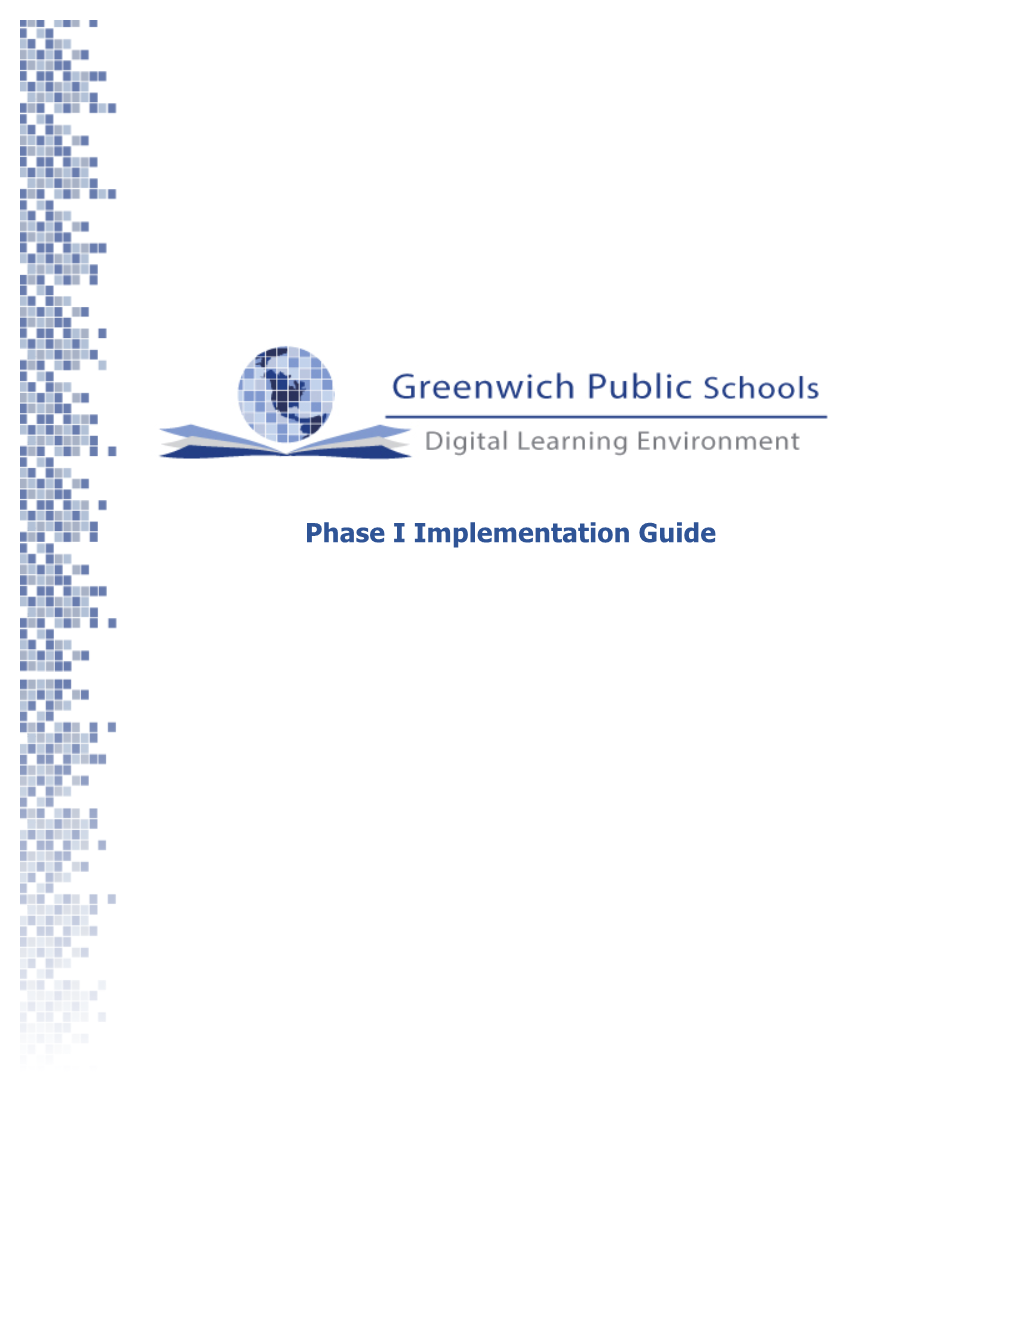 FINAL- Digital Learning Environment Implementation Guide-031914